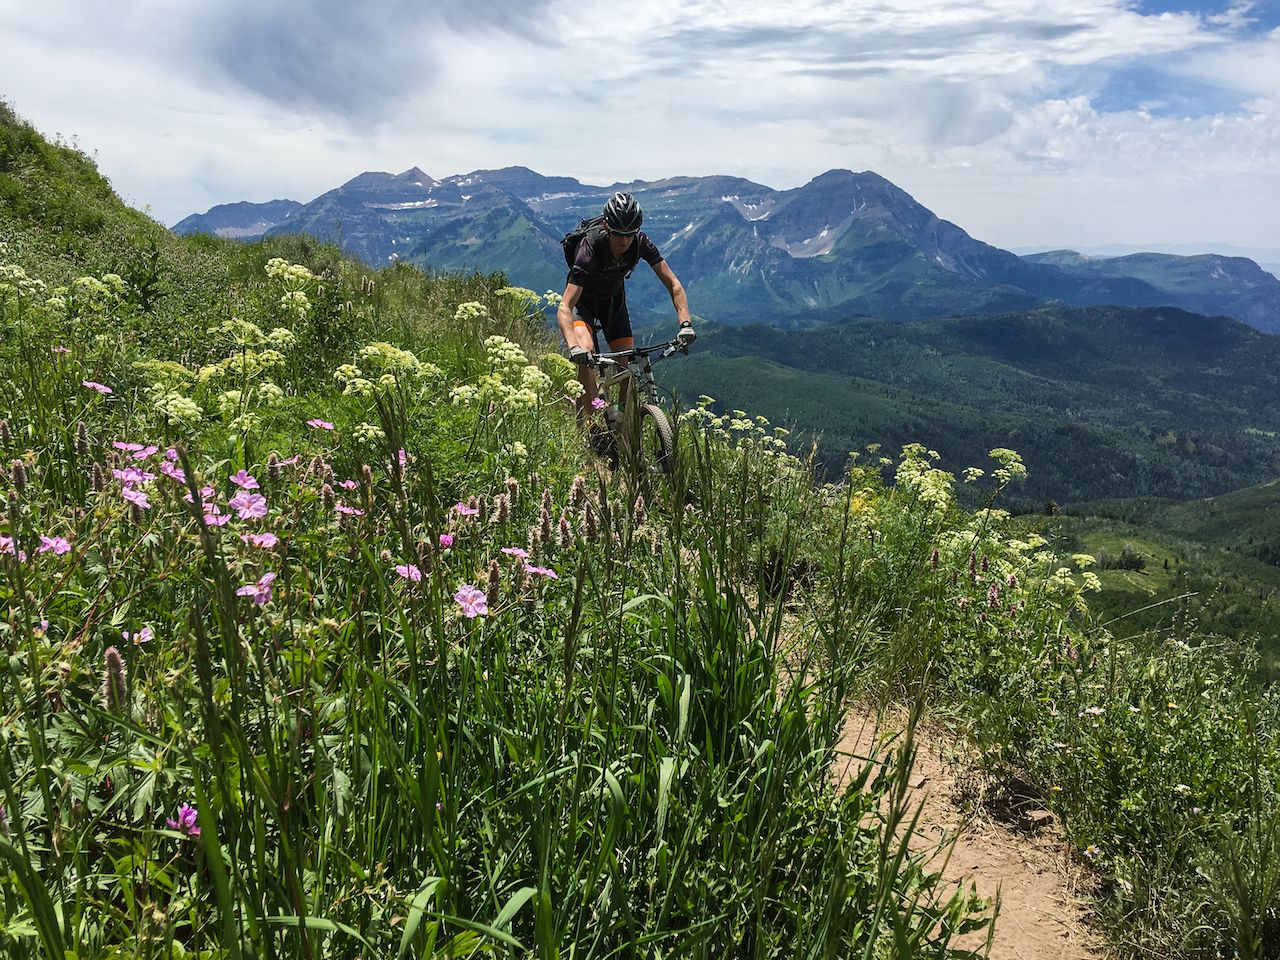 A cyclist descends to a single track trail in front of a high alpine mountain peak